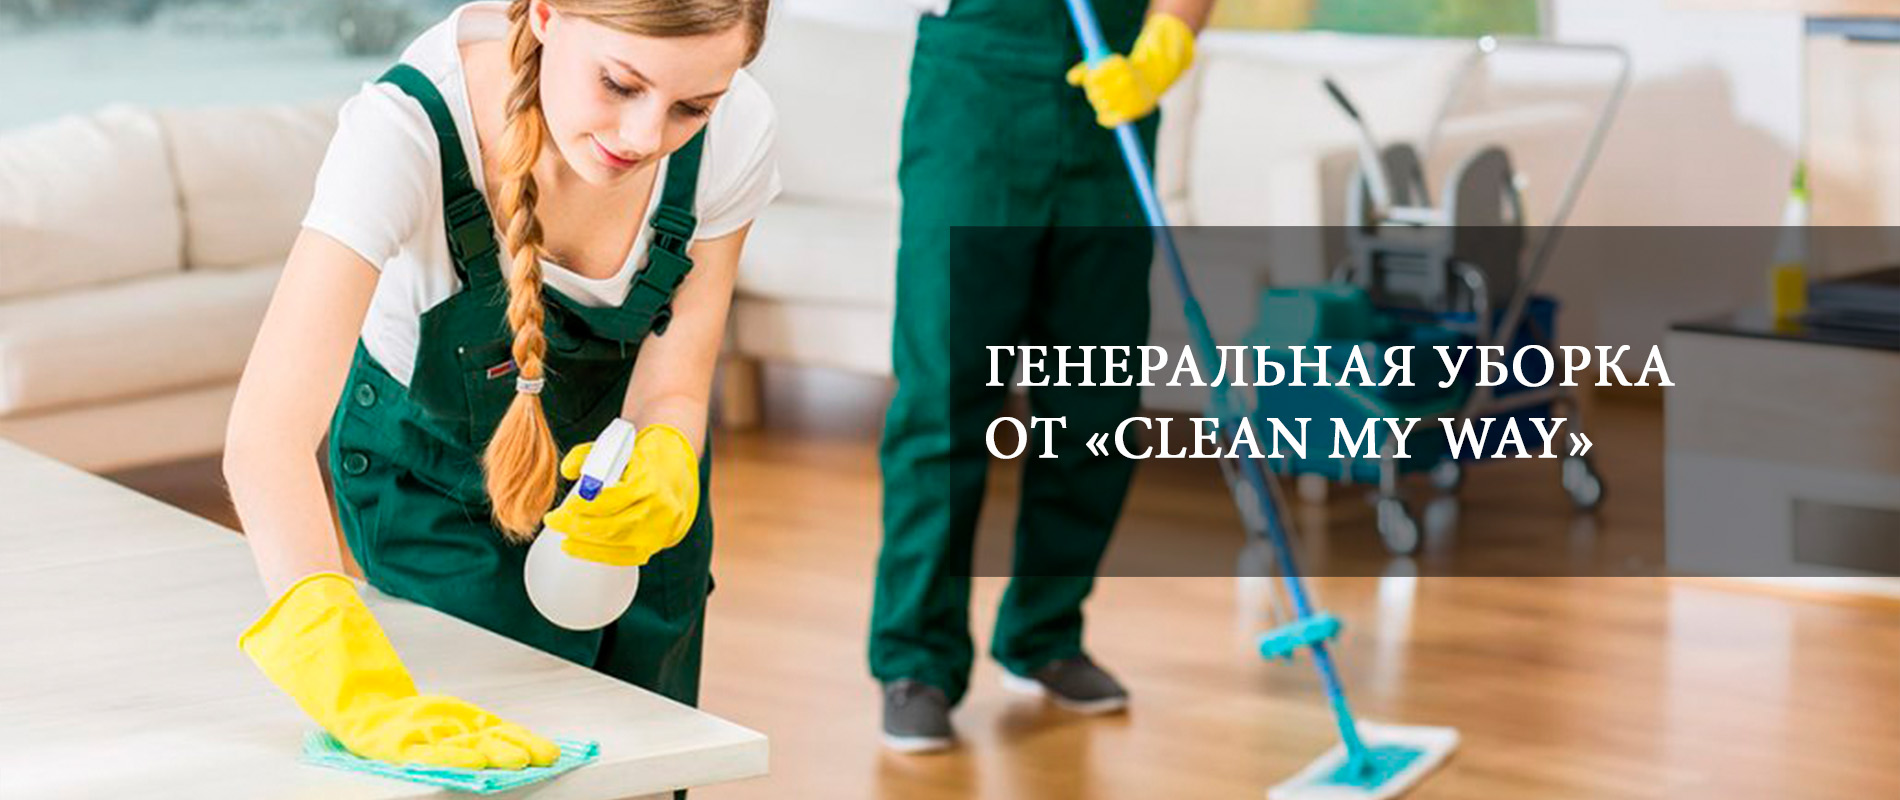 Clean My Way - cleaning company moscow. ГЕНЕРАЛЬНАЯ УБОРКА!